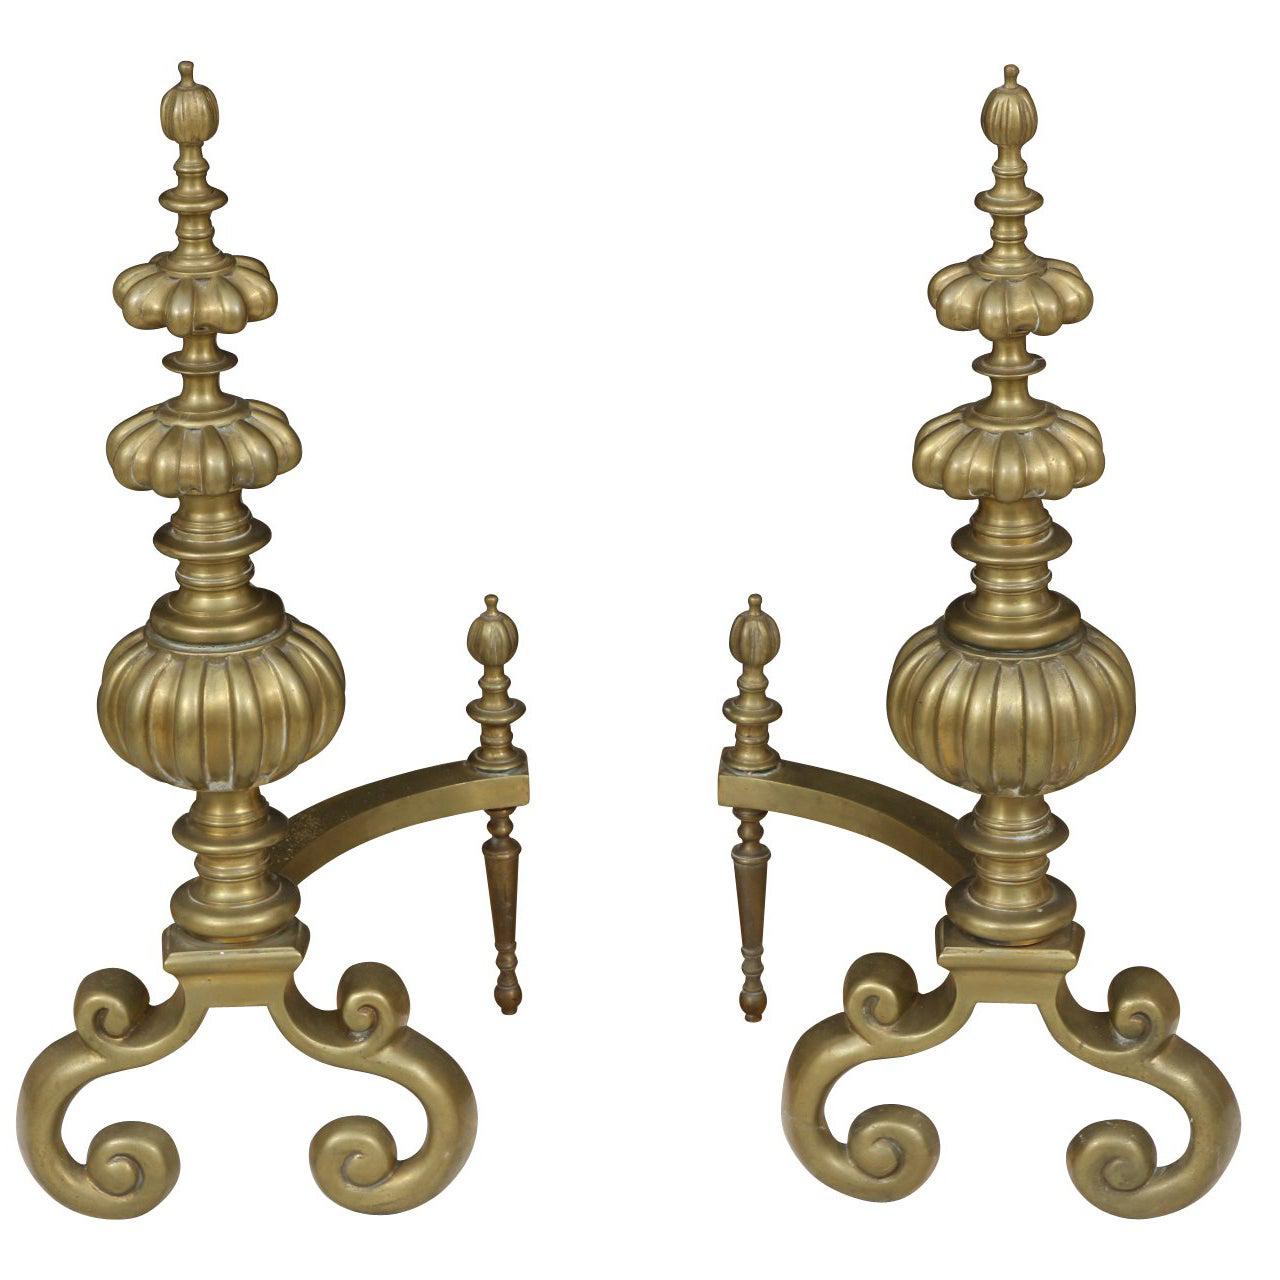 Pair of Massive Baroque Style Solid Brass Andirons For Sale